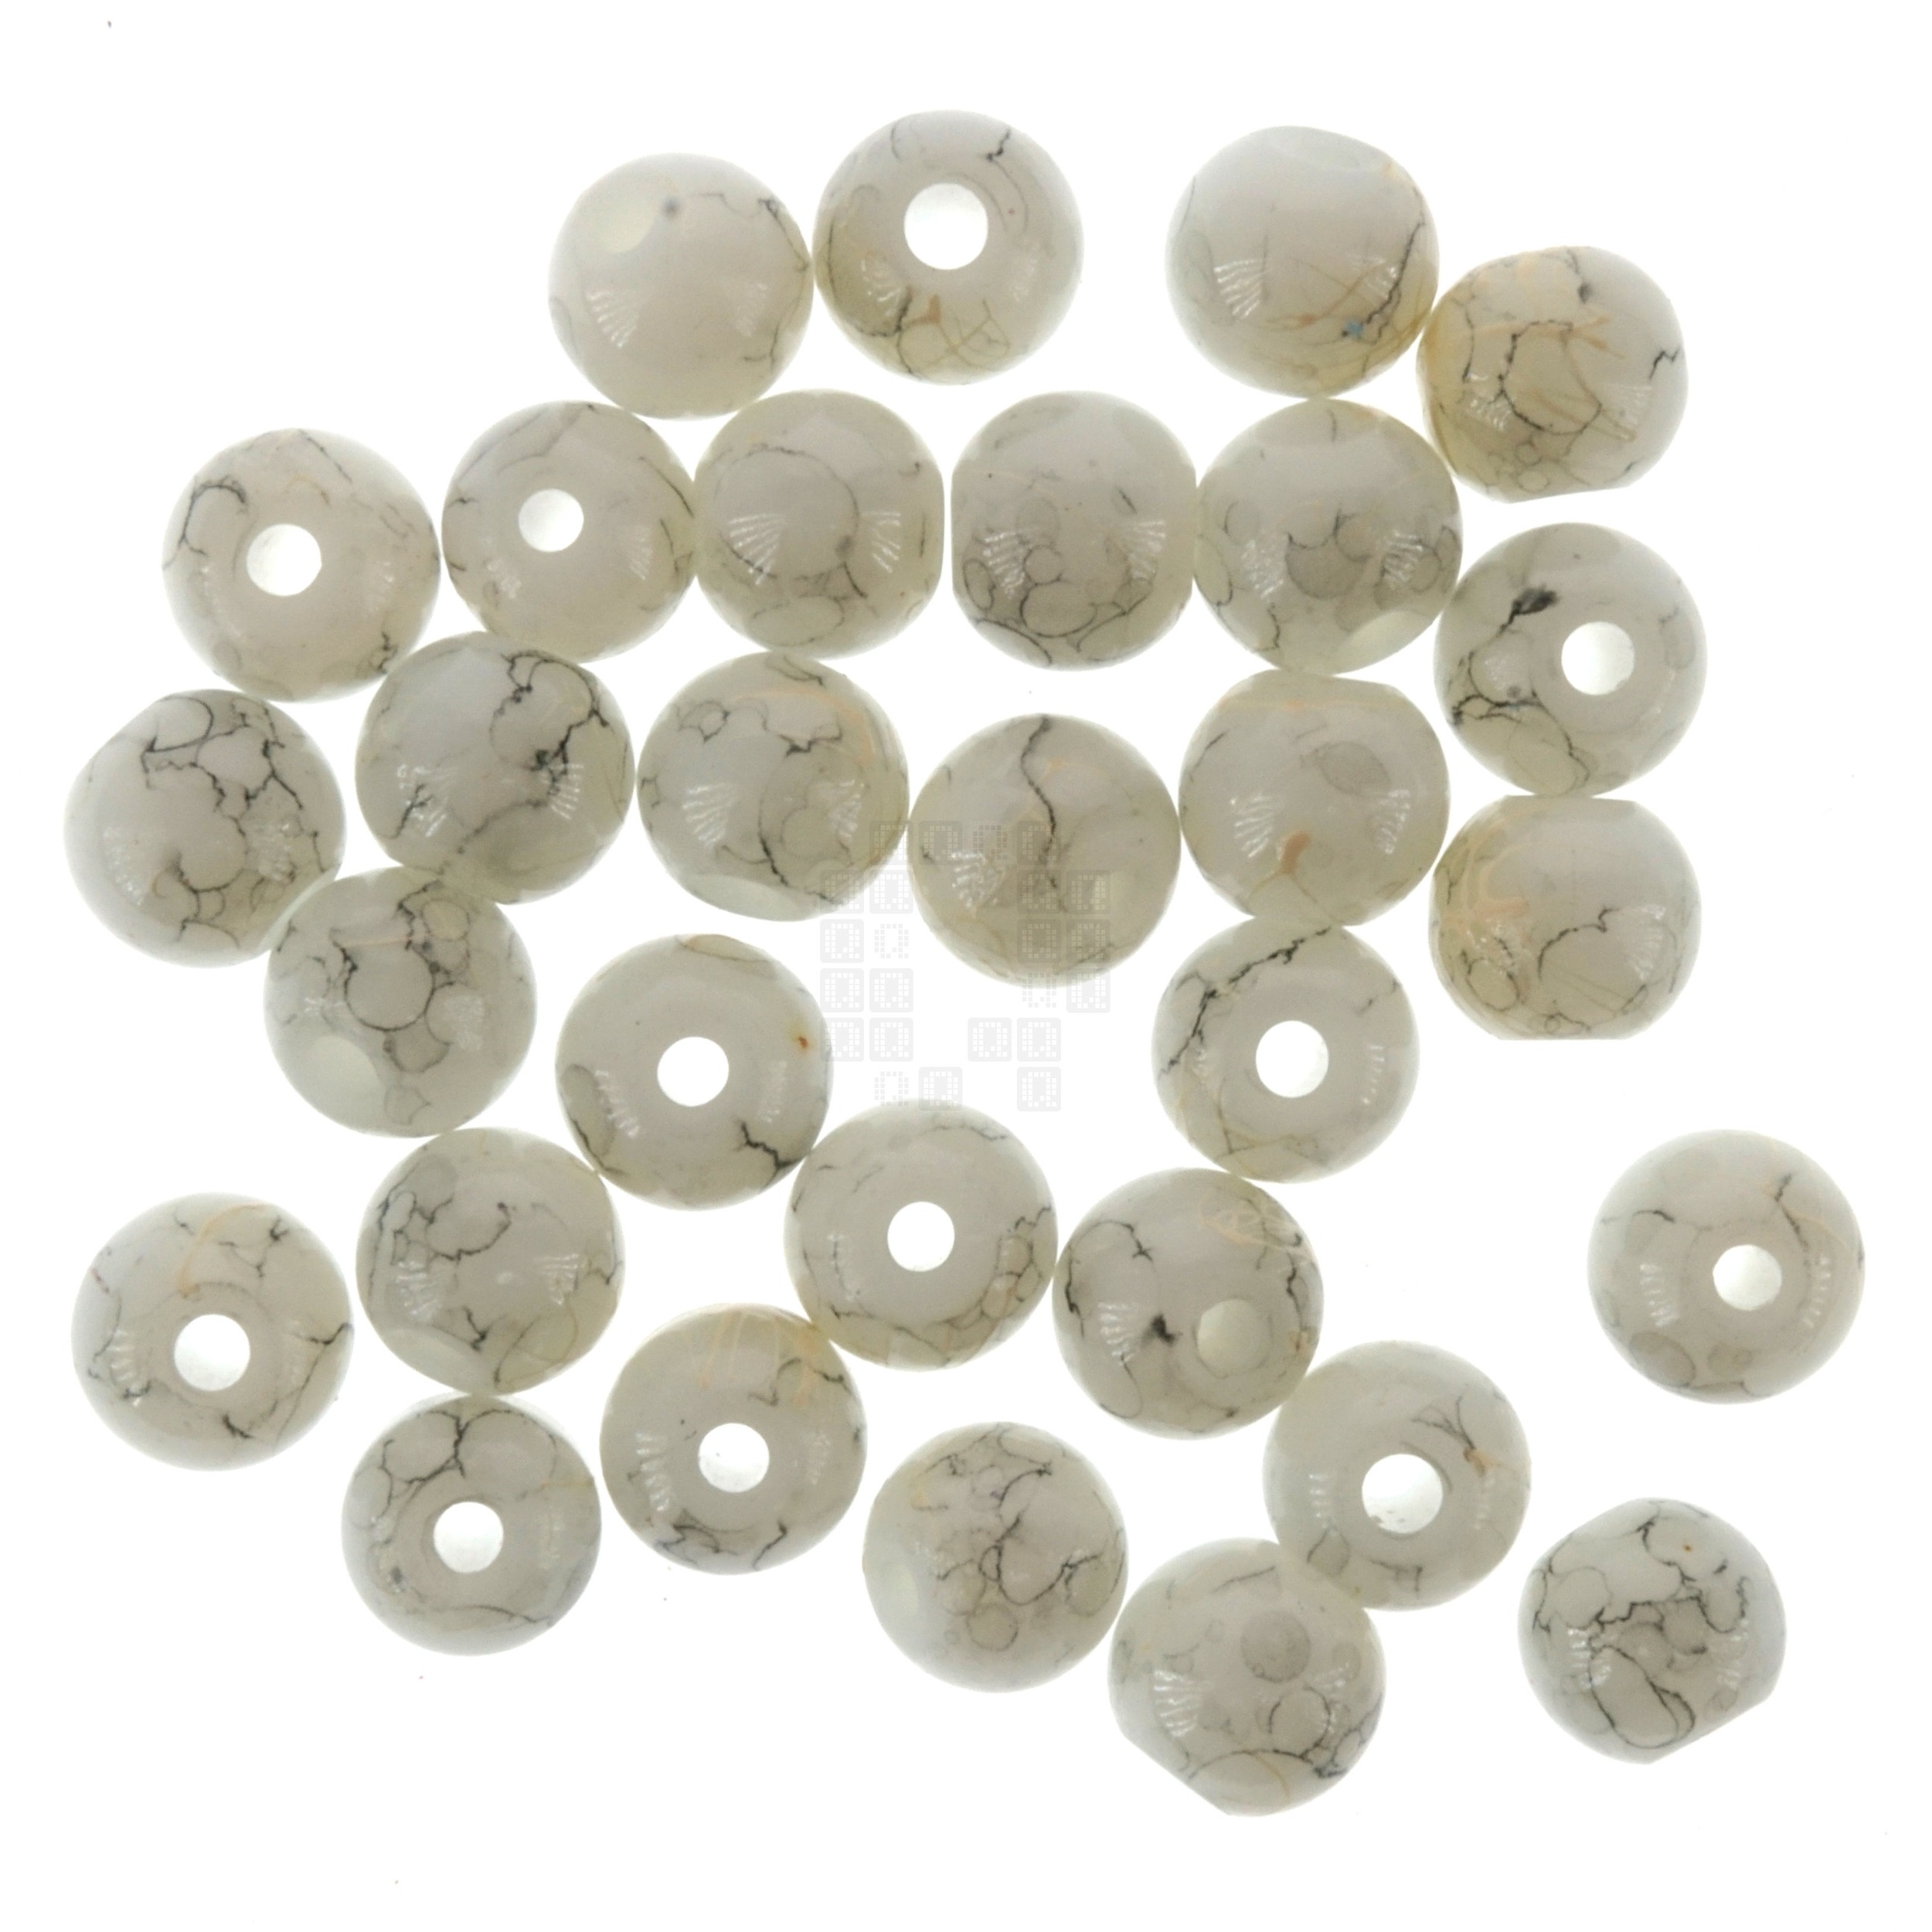 White Marble 8mm Loose Glass Beads, 30 Pieces